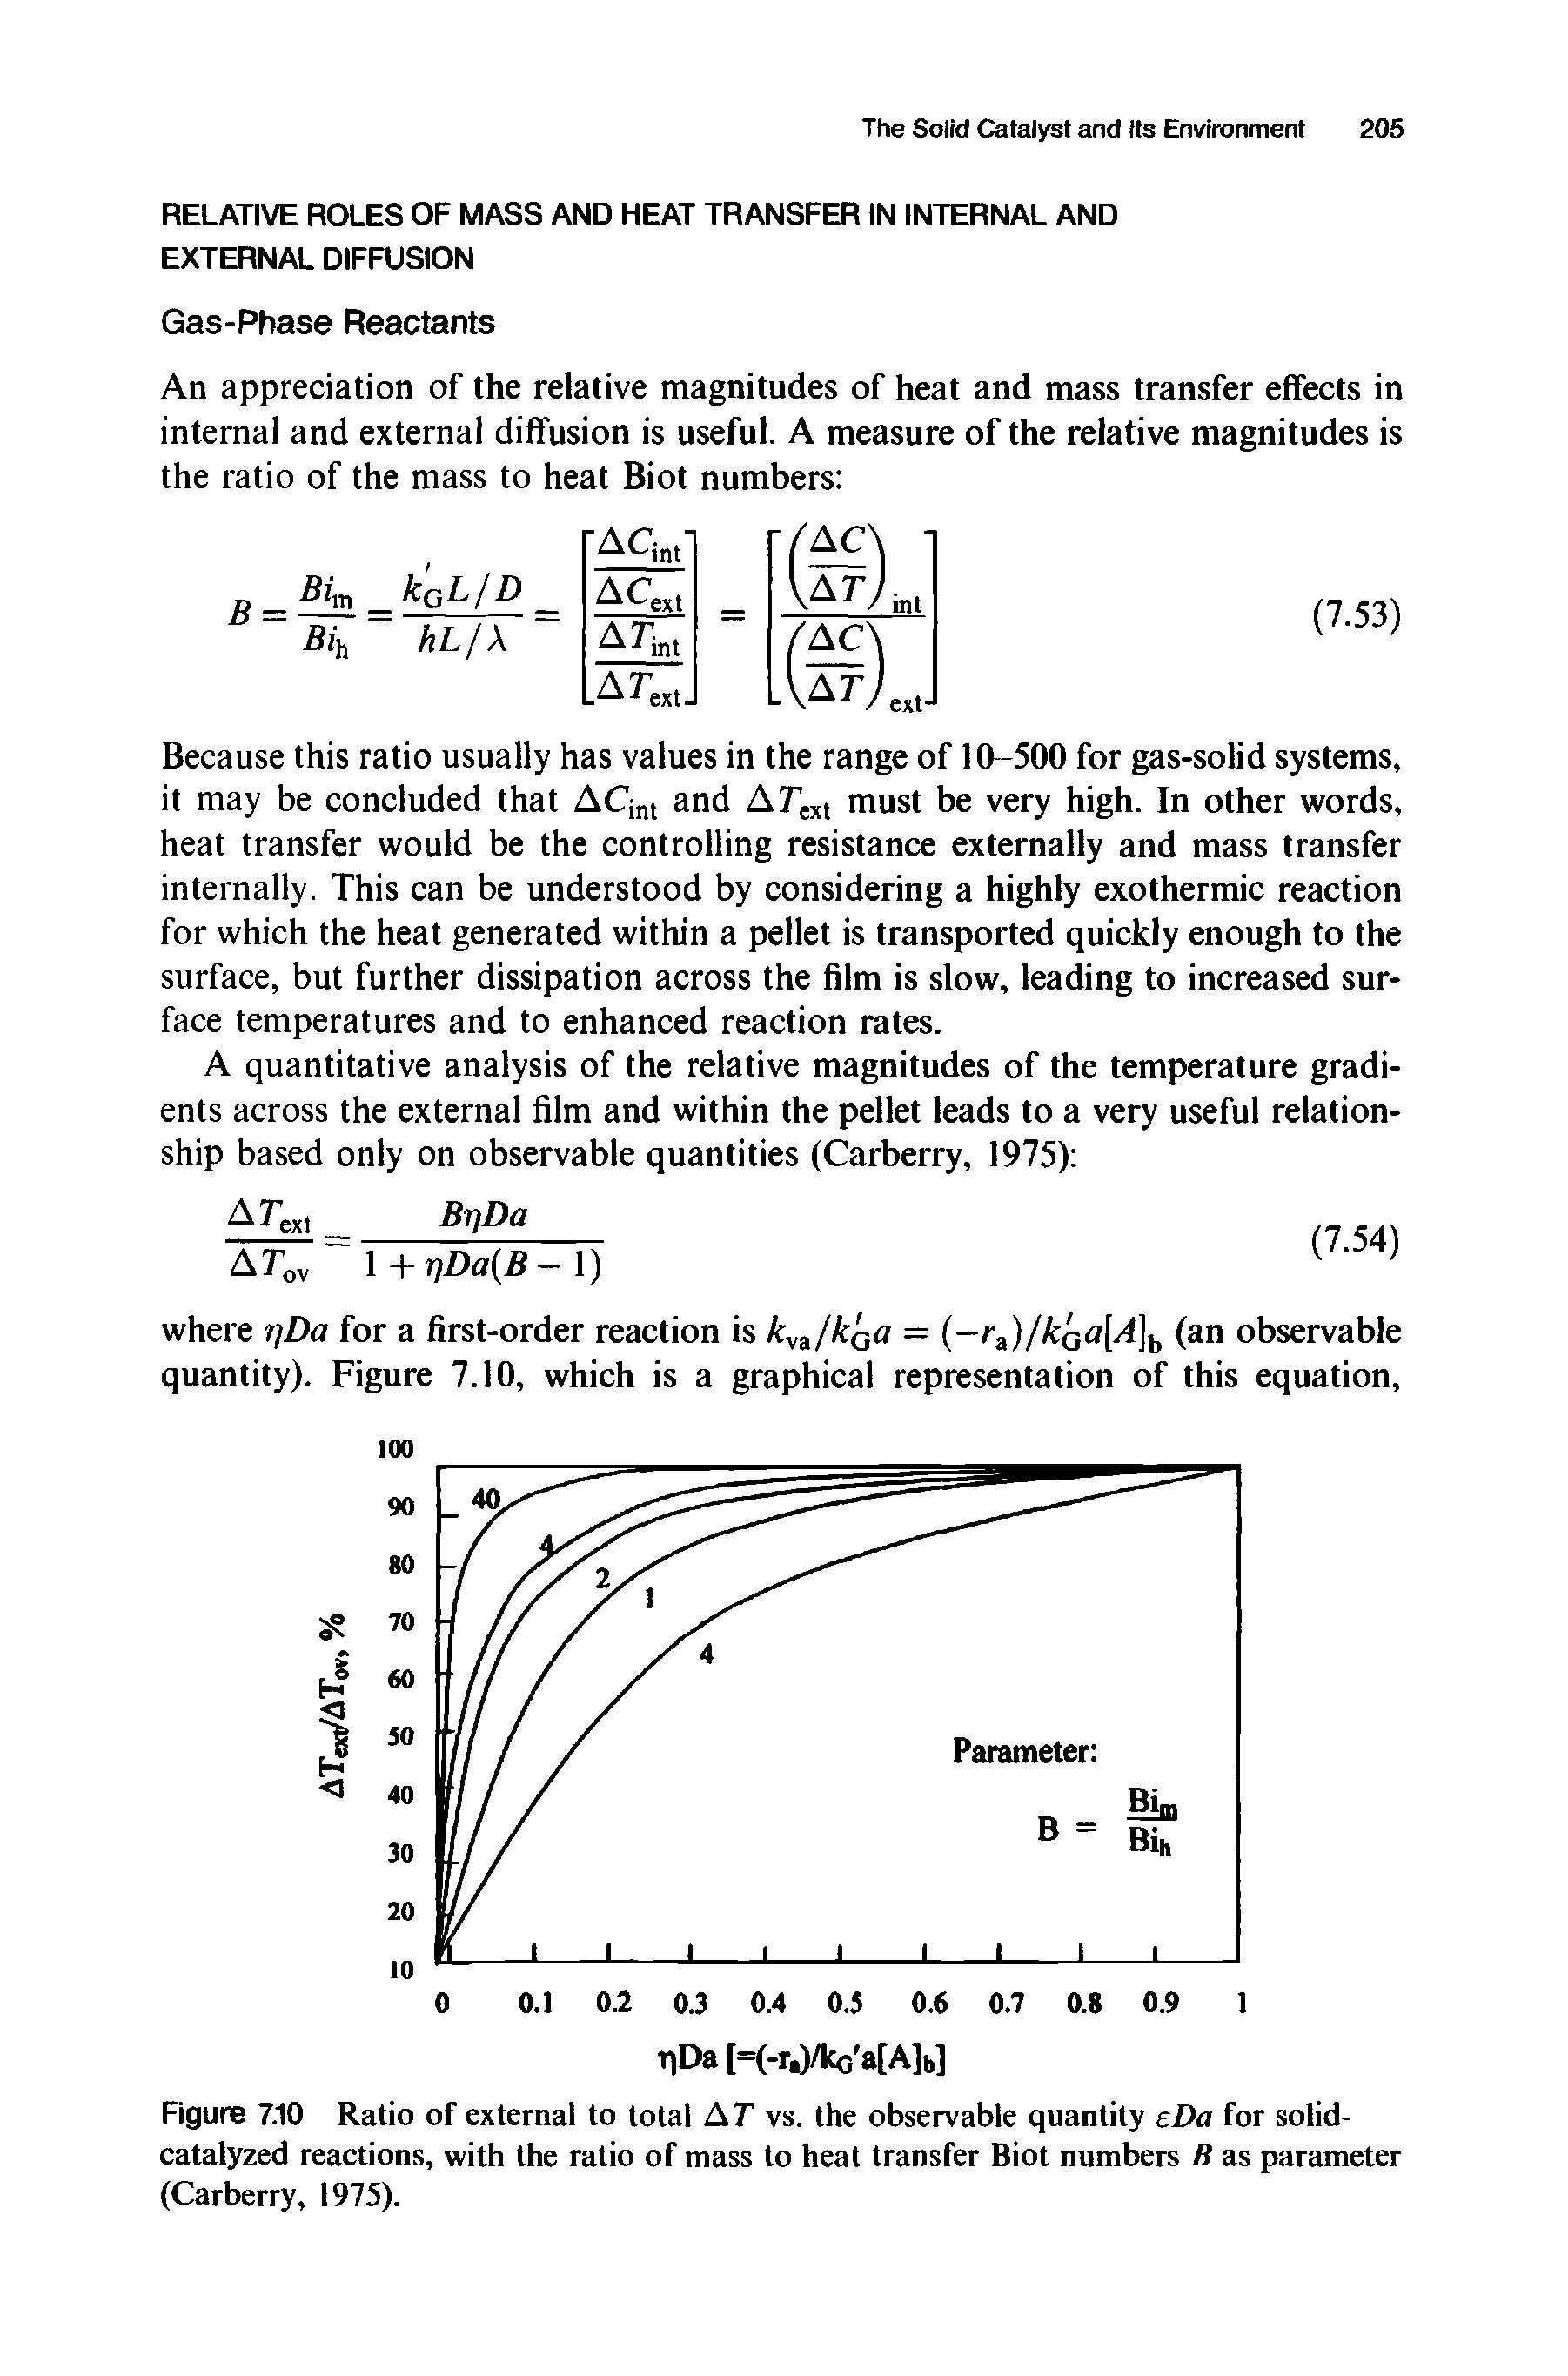 Figure 7.10 Ratio of external to total AT vs. the observable quantity eDa for solid-catalyzed reactions, with the ratio of mass to heat transfer Biot numbers B as parameter (Carberry, 1975).